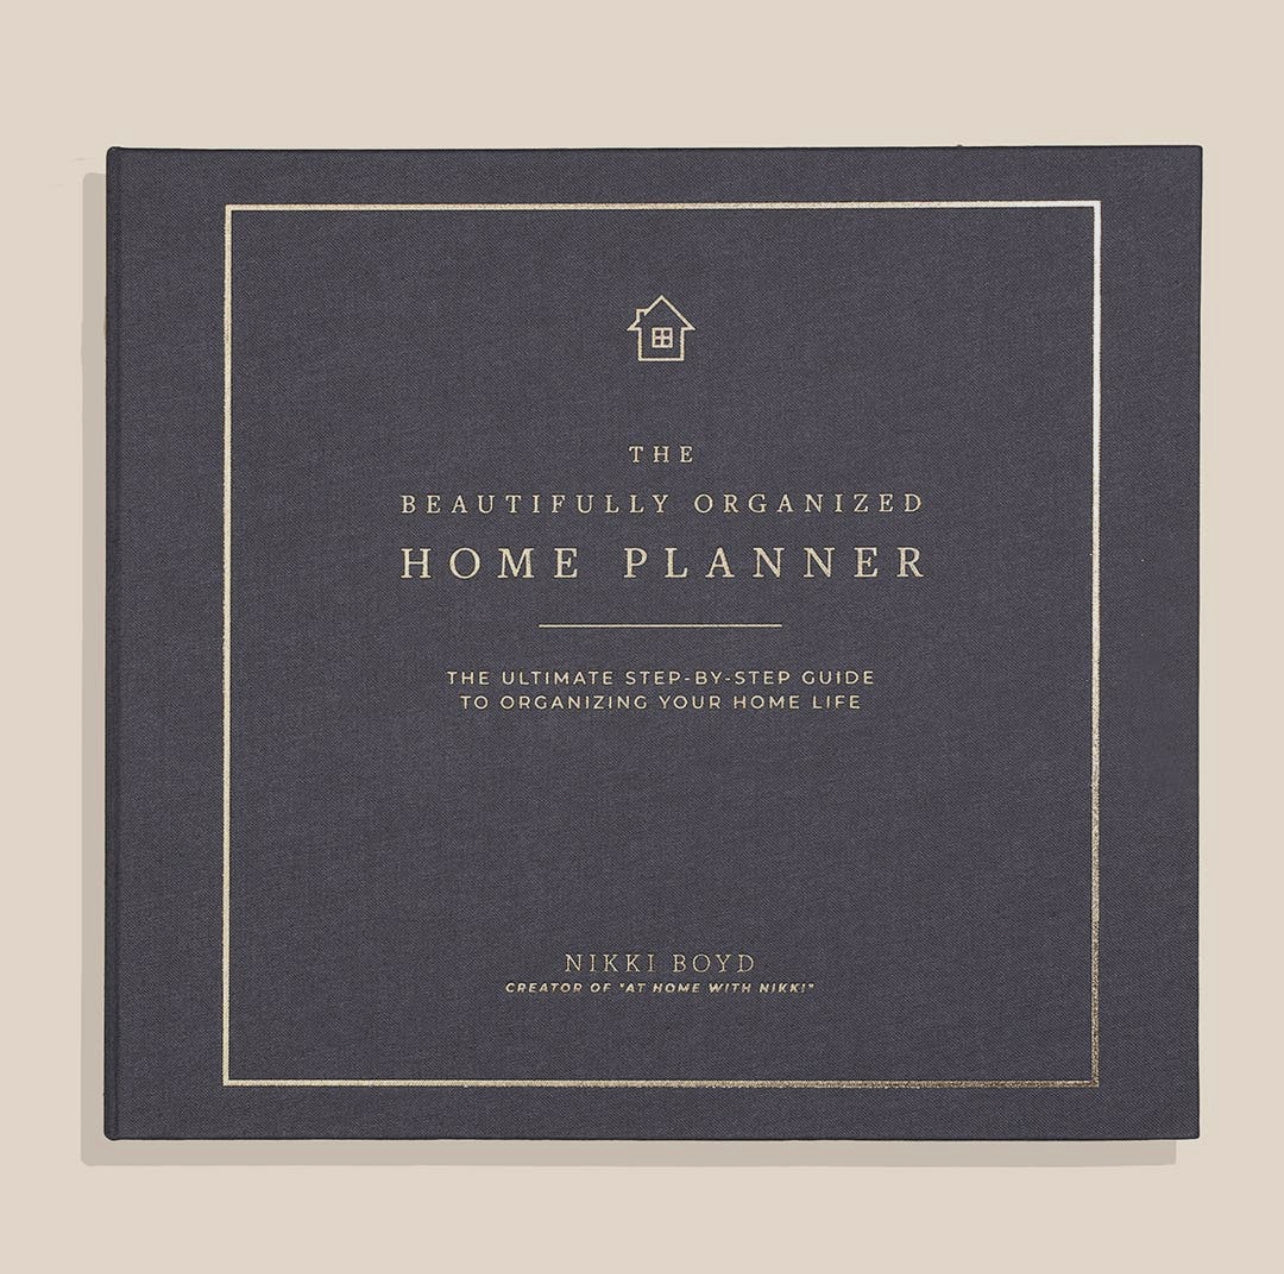 The Beautifully Organized Home Planner